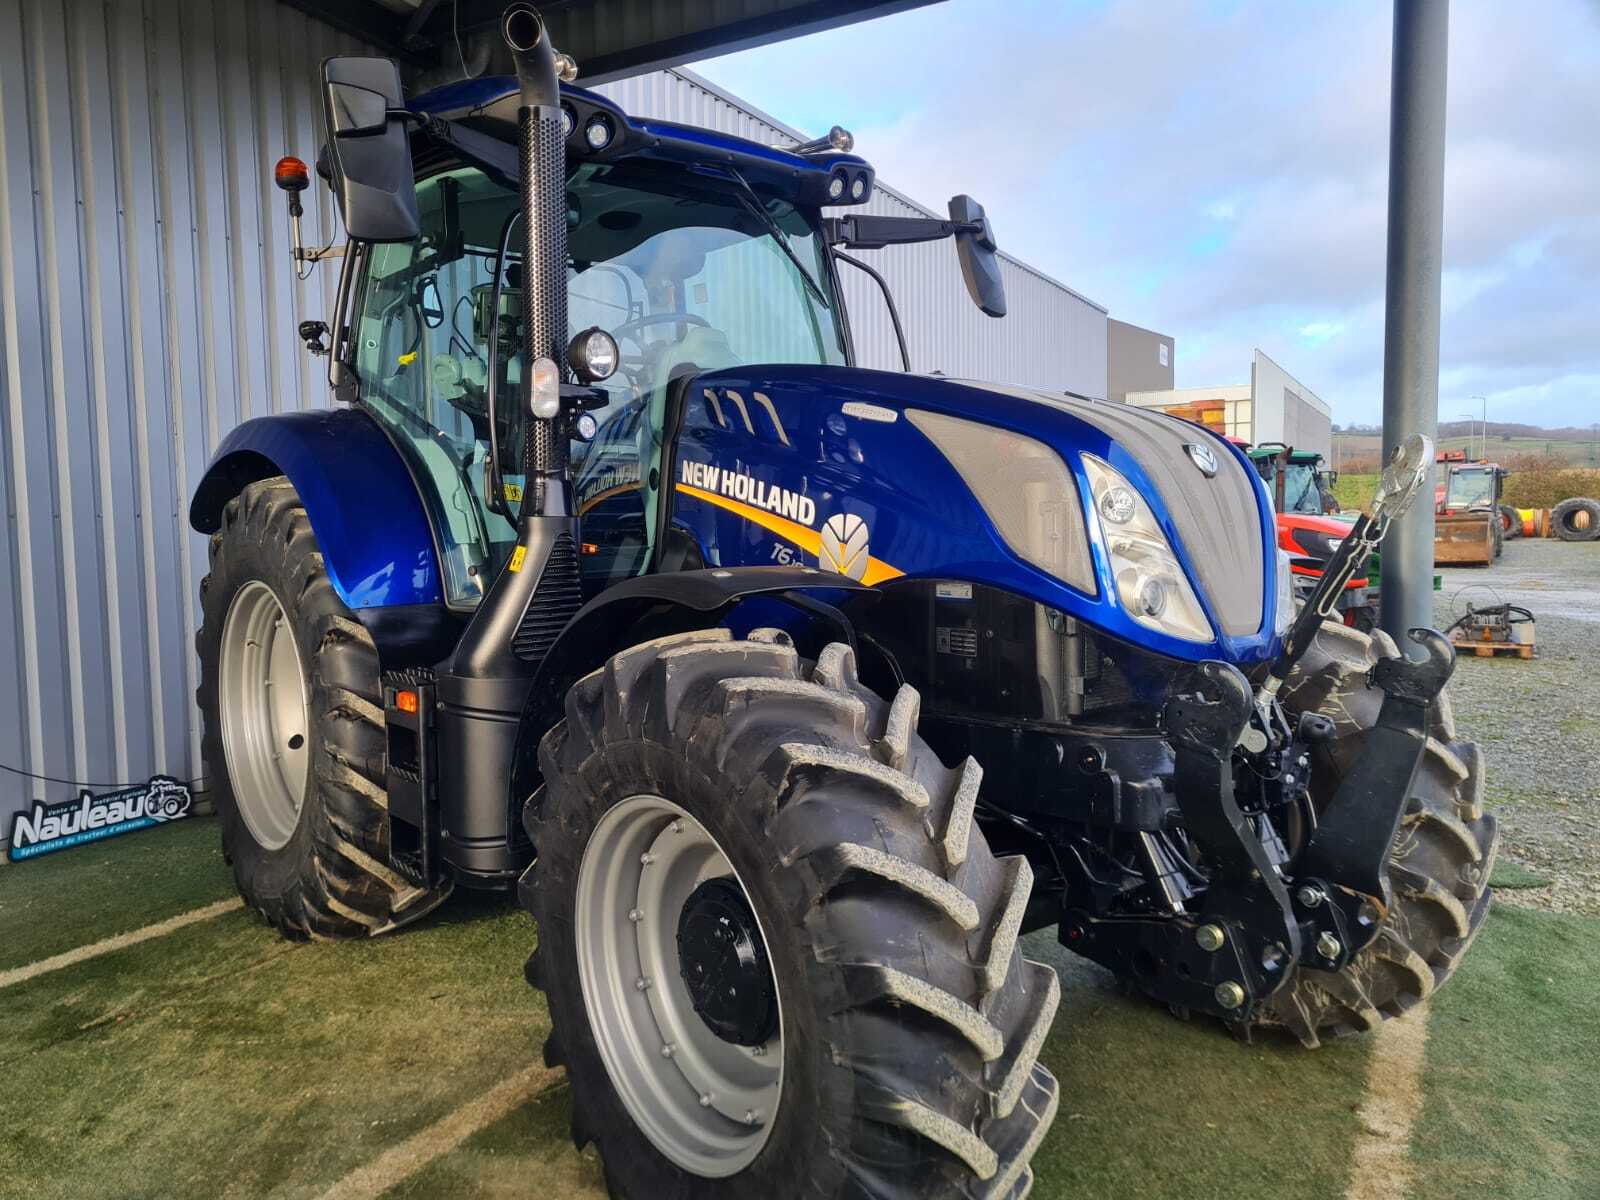 NEW HOLLAND T6.180 DC